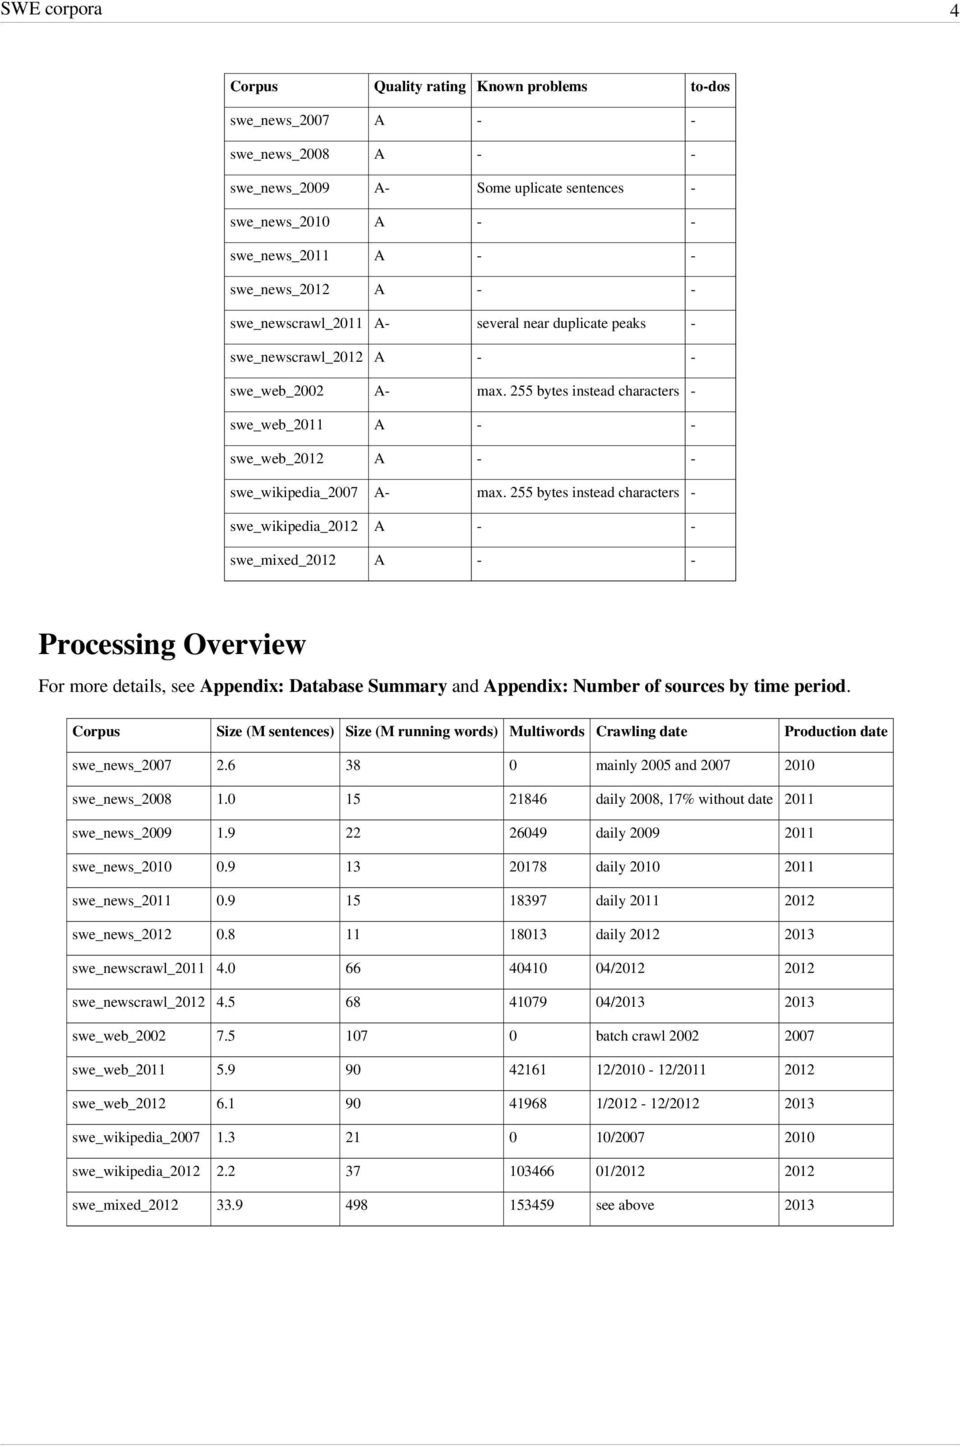 255 bytes instead characters - swe_wikipedia_2012 A - - swe_mixed_2012 A - - Processing Overview For more details, see Appendix: Database Summary and Appendix: Number of sources by time period.